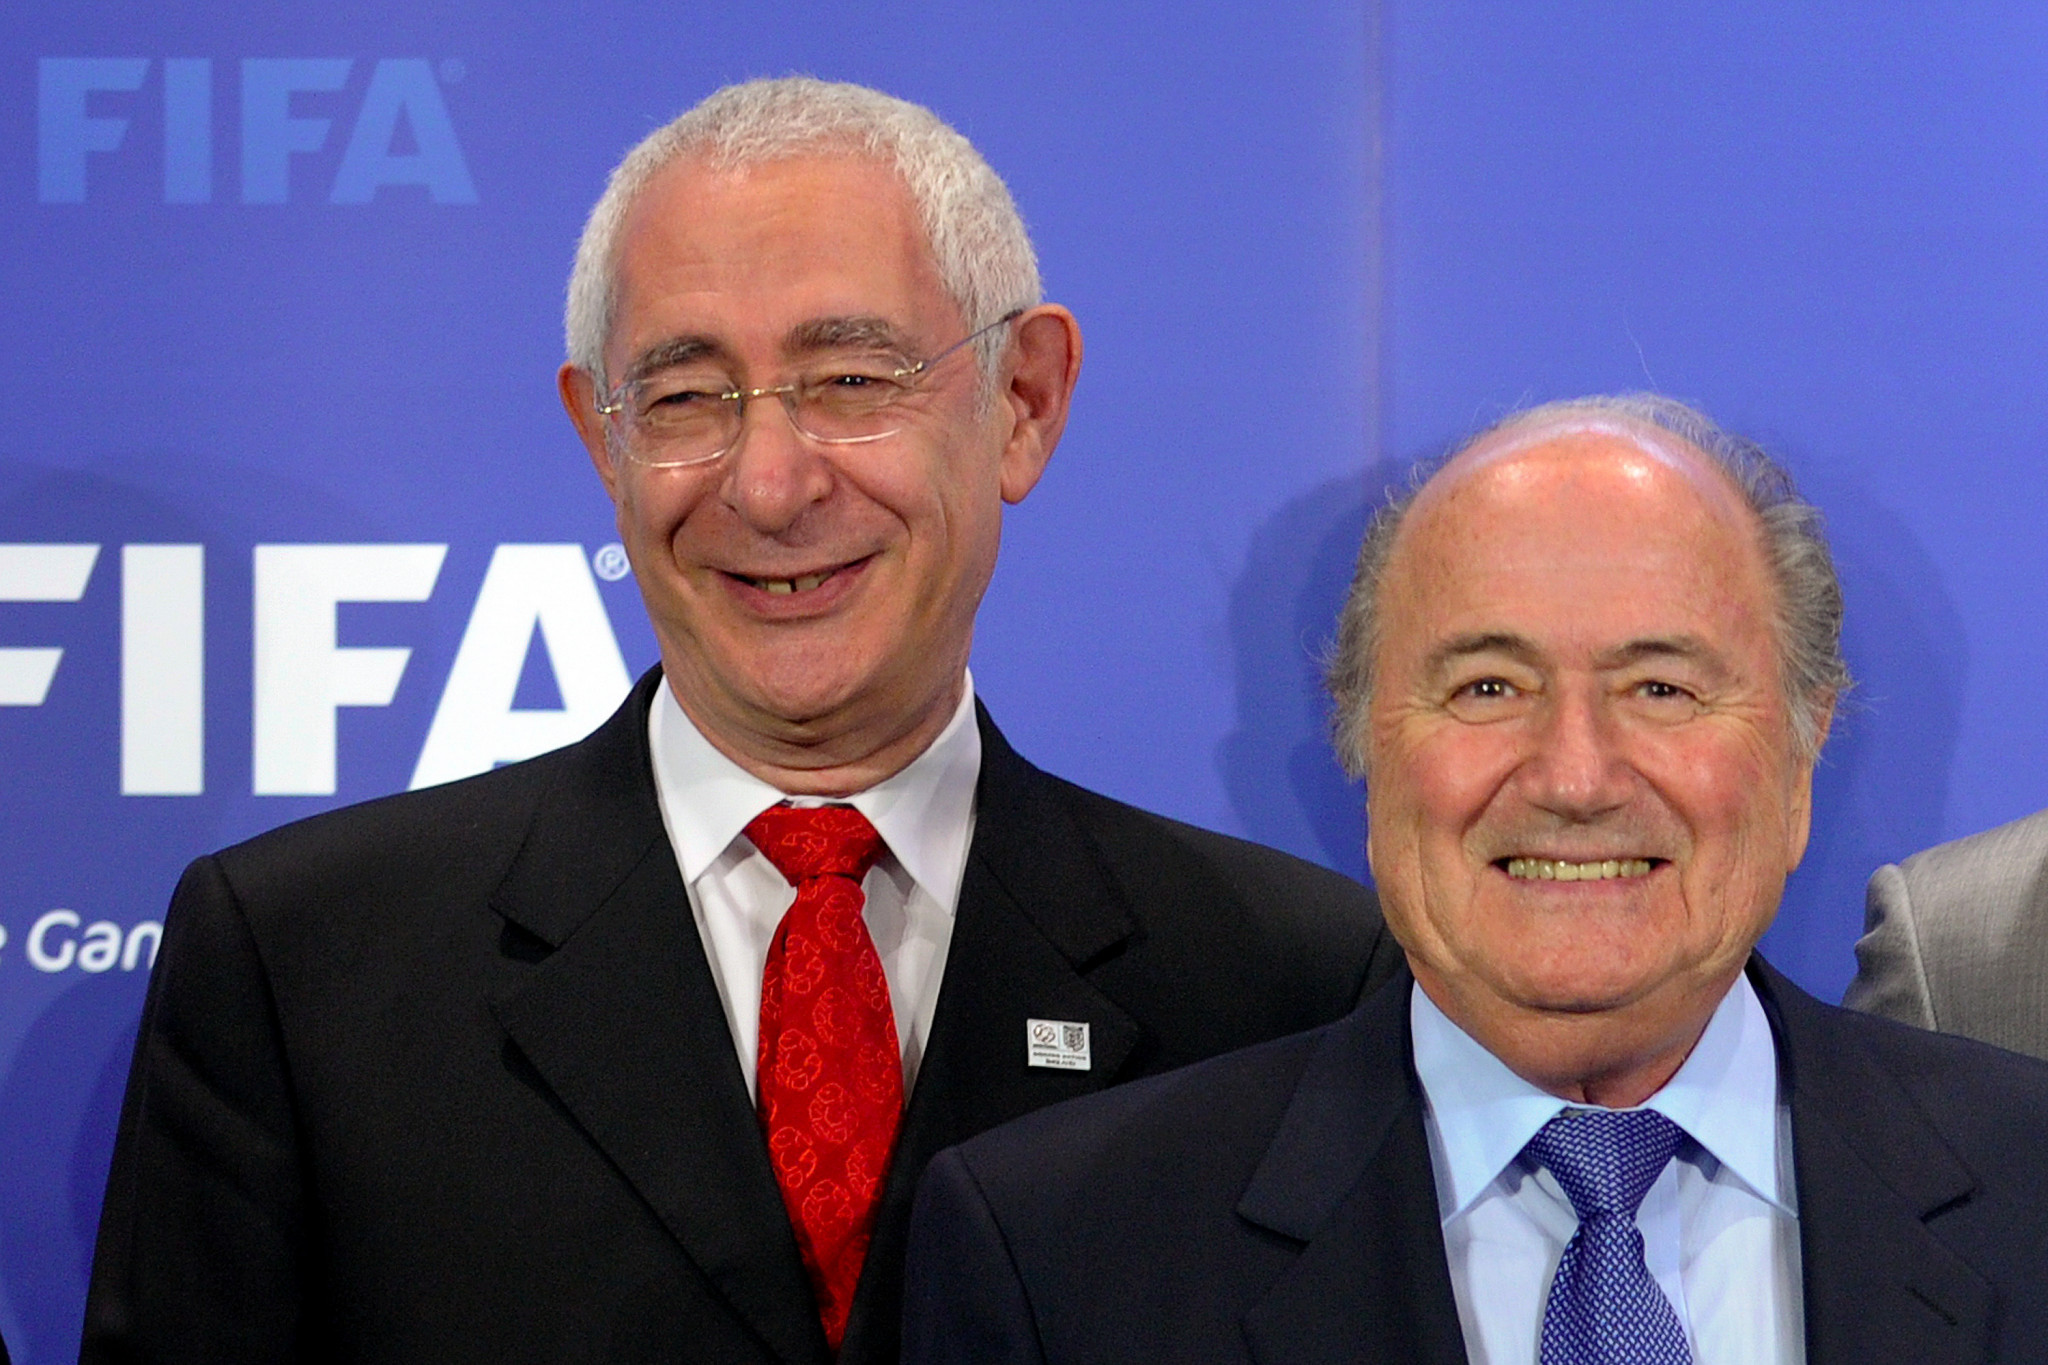 Former FA chairman Lord Triesman has claimed England's bid for the 2018 World Cup was hacked ©Getty Images